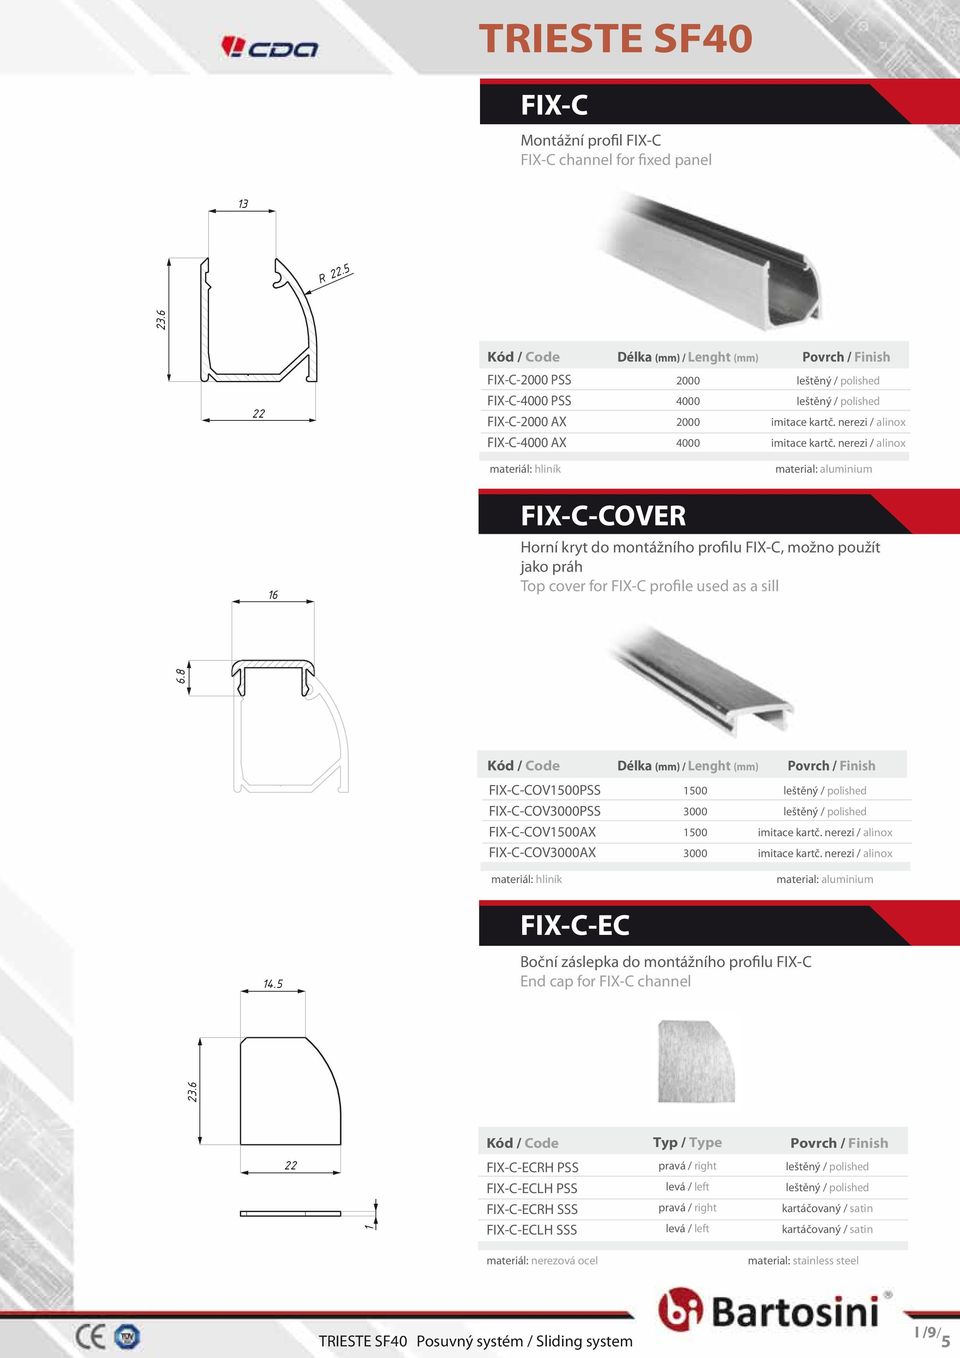 jako práh Top cover for FIX-C profile used as a sill Délka (mm) / Lenght (mm) / FIX-C-COV500PSS FIX-C-COV3000PSS FIX-C-COV500AX FIX-C-COV3000AX materiál: hliník 500 3000 500 3000 material: aluminium